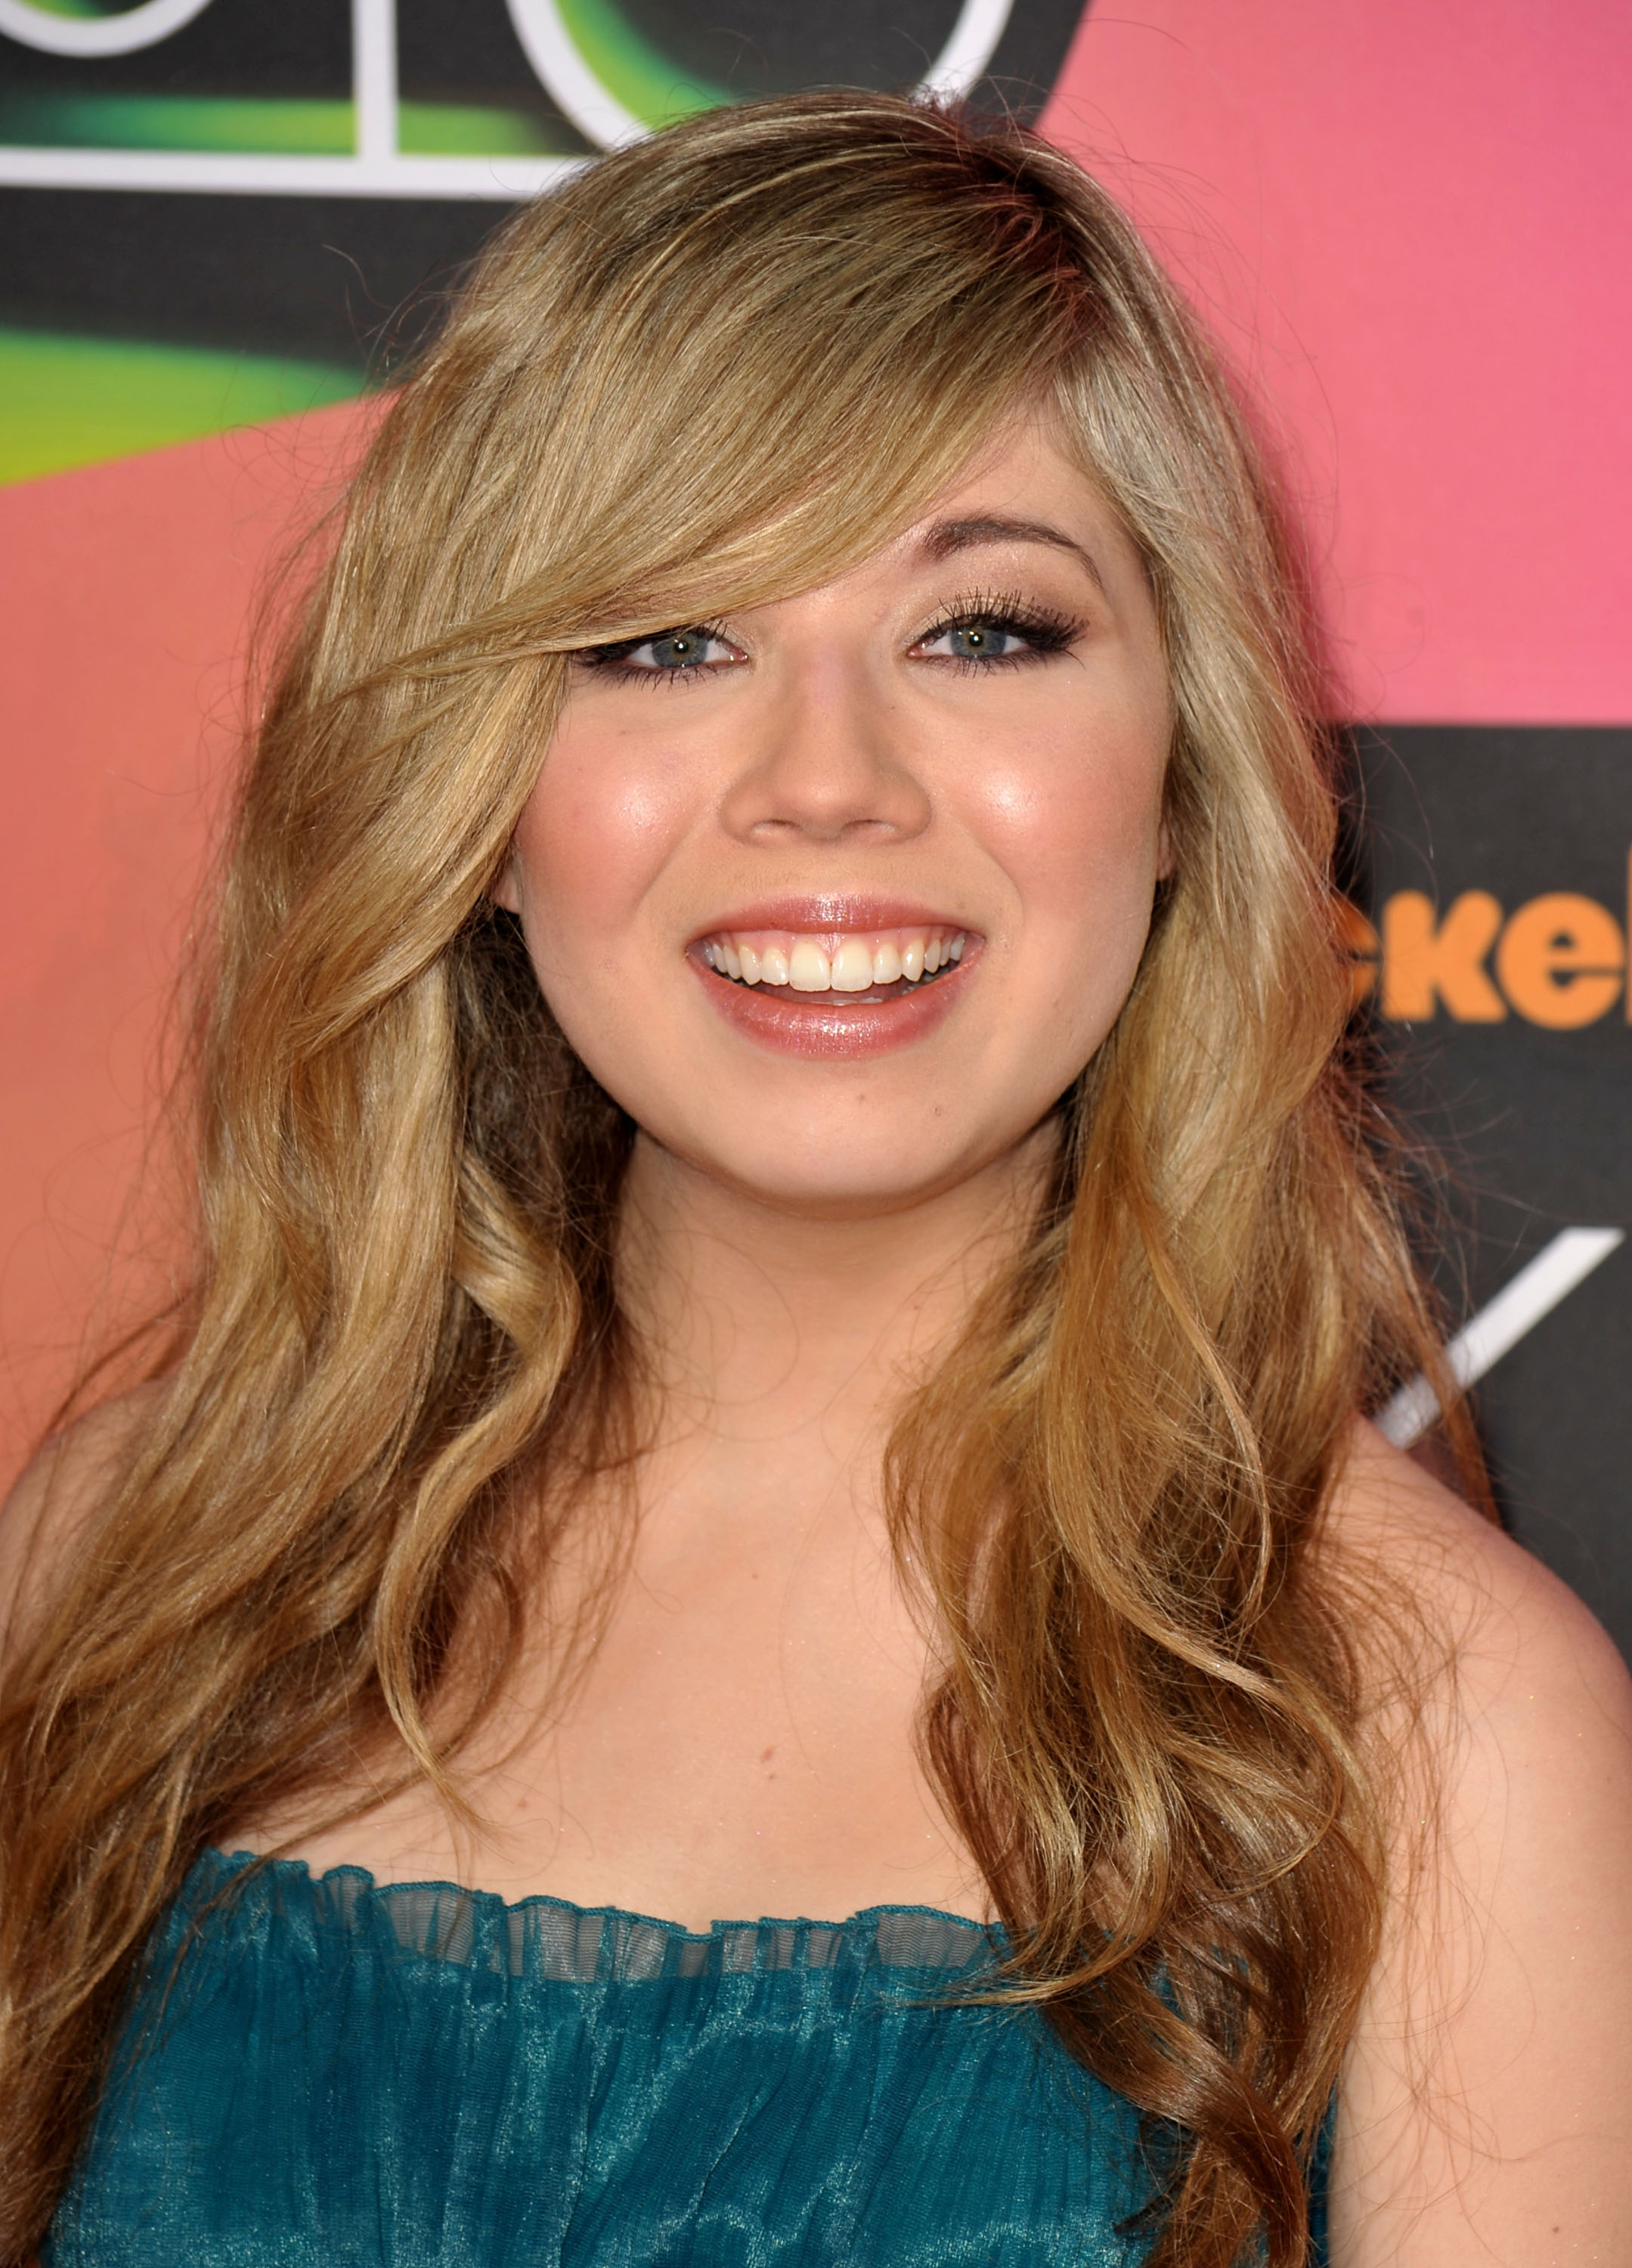 Jennette McCurdy attends the 23rd annual Kid's Choice Awards on March 27, 2010 in Los Angeles, California | Source: Getty Images